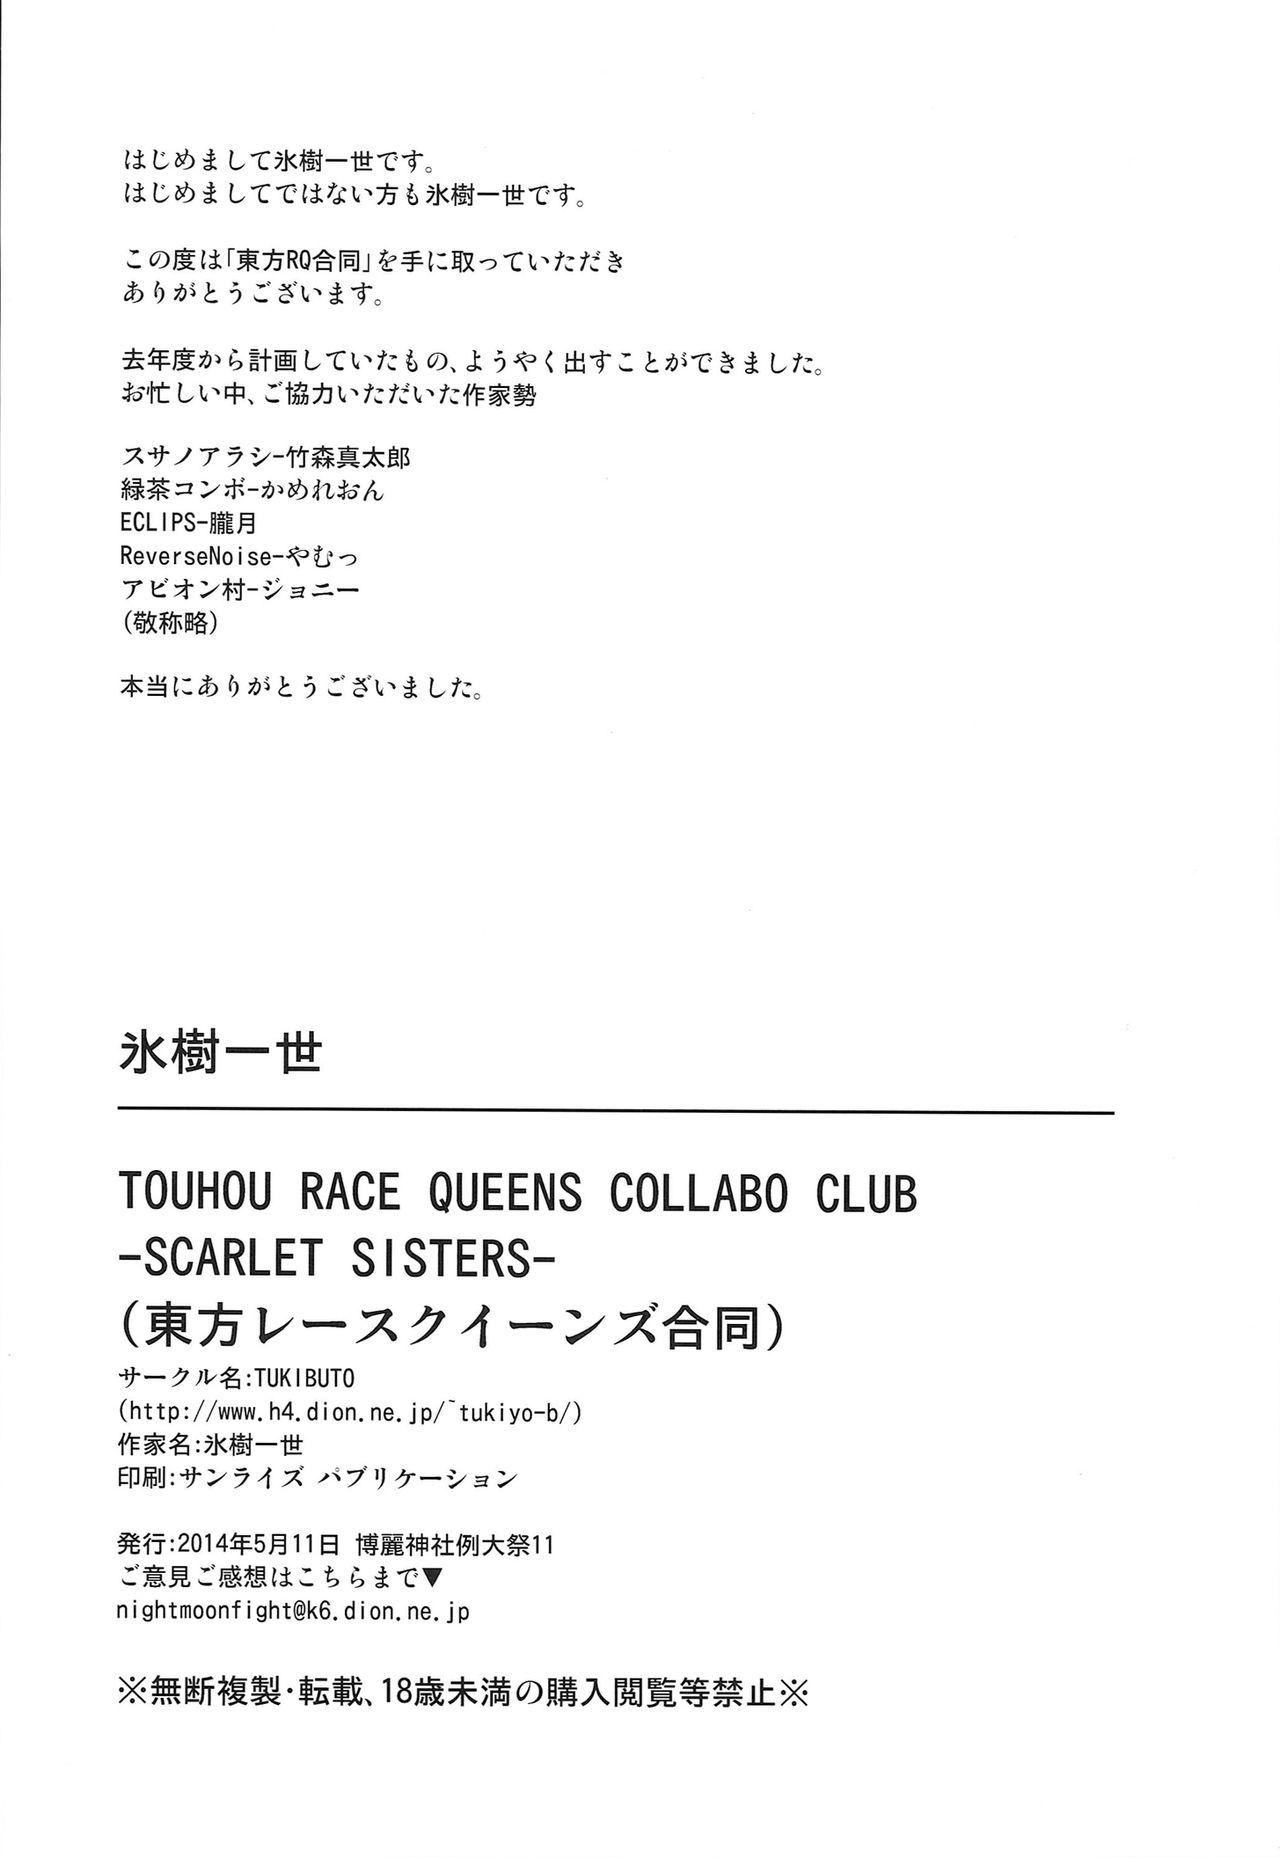 TOUHOU RACE QUEENS COLLABO CLUB 61